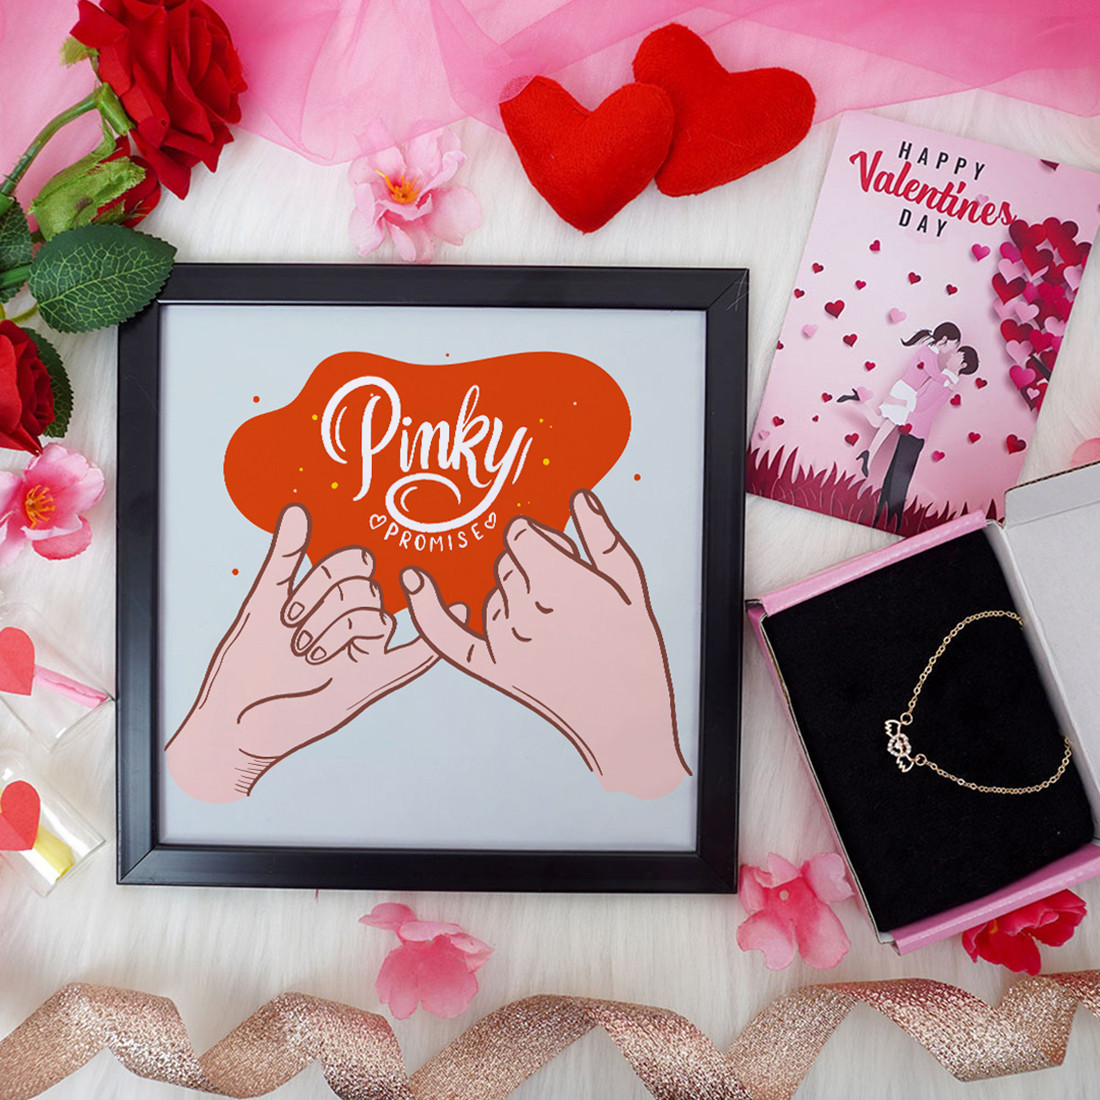 Promise Valentine Gift Set | Valentine's Day Gifts for Girlfriend | Valentine Gift for Wife | Women's Pendant/Pendant for Girl/Greeting Card | Photo Frame (8x8 Inches)